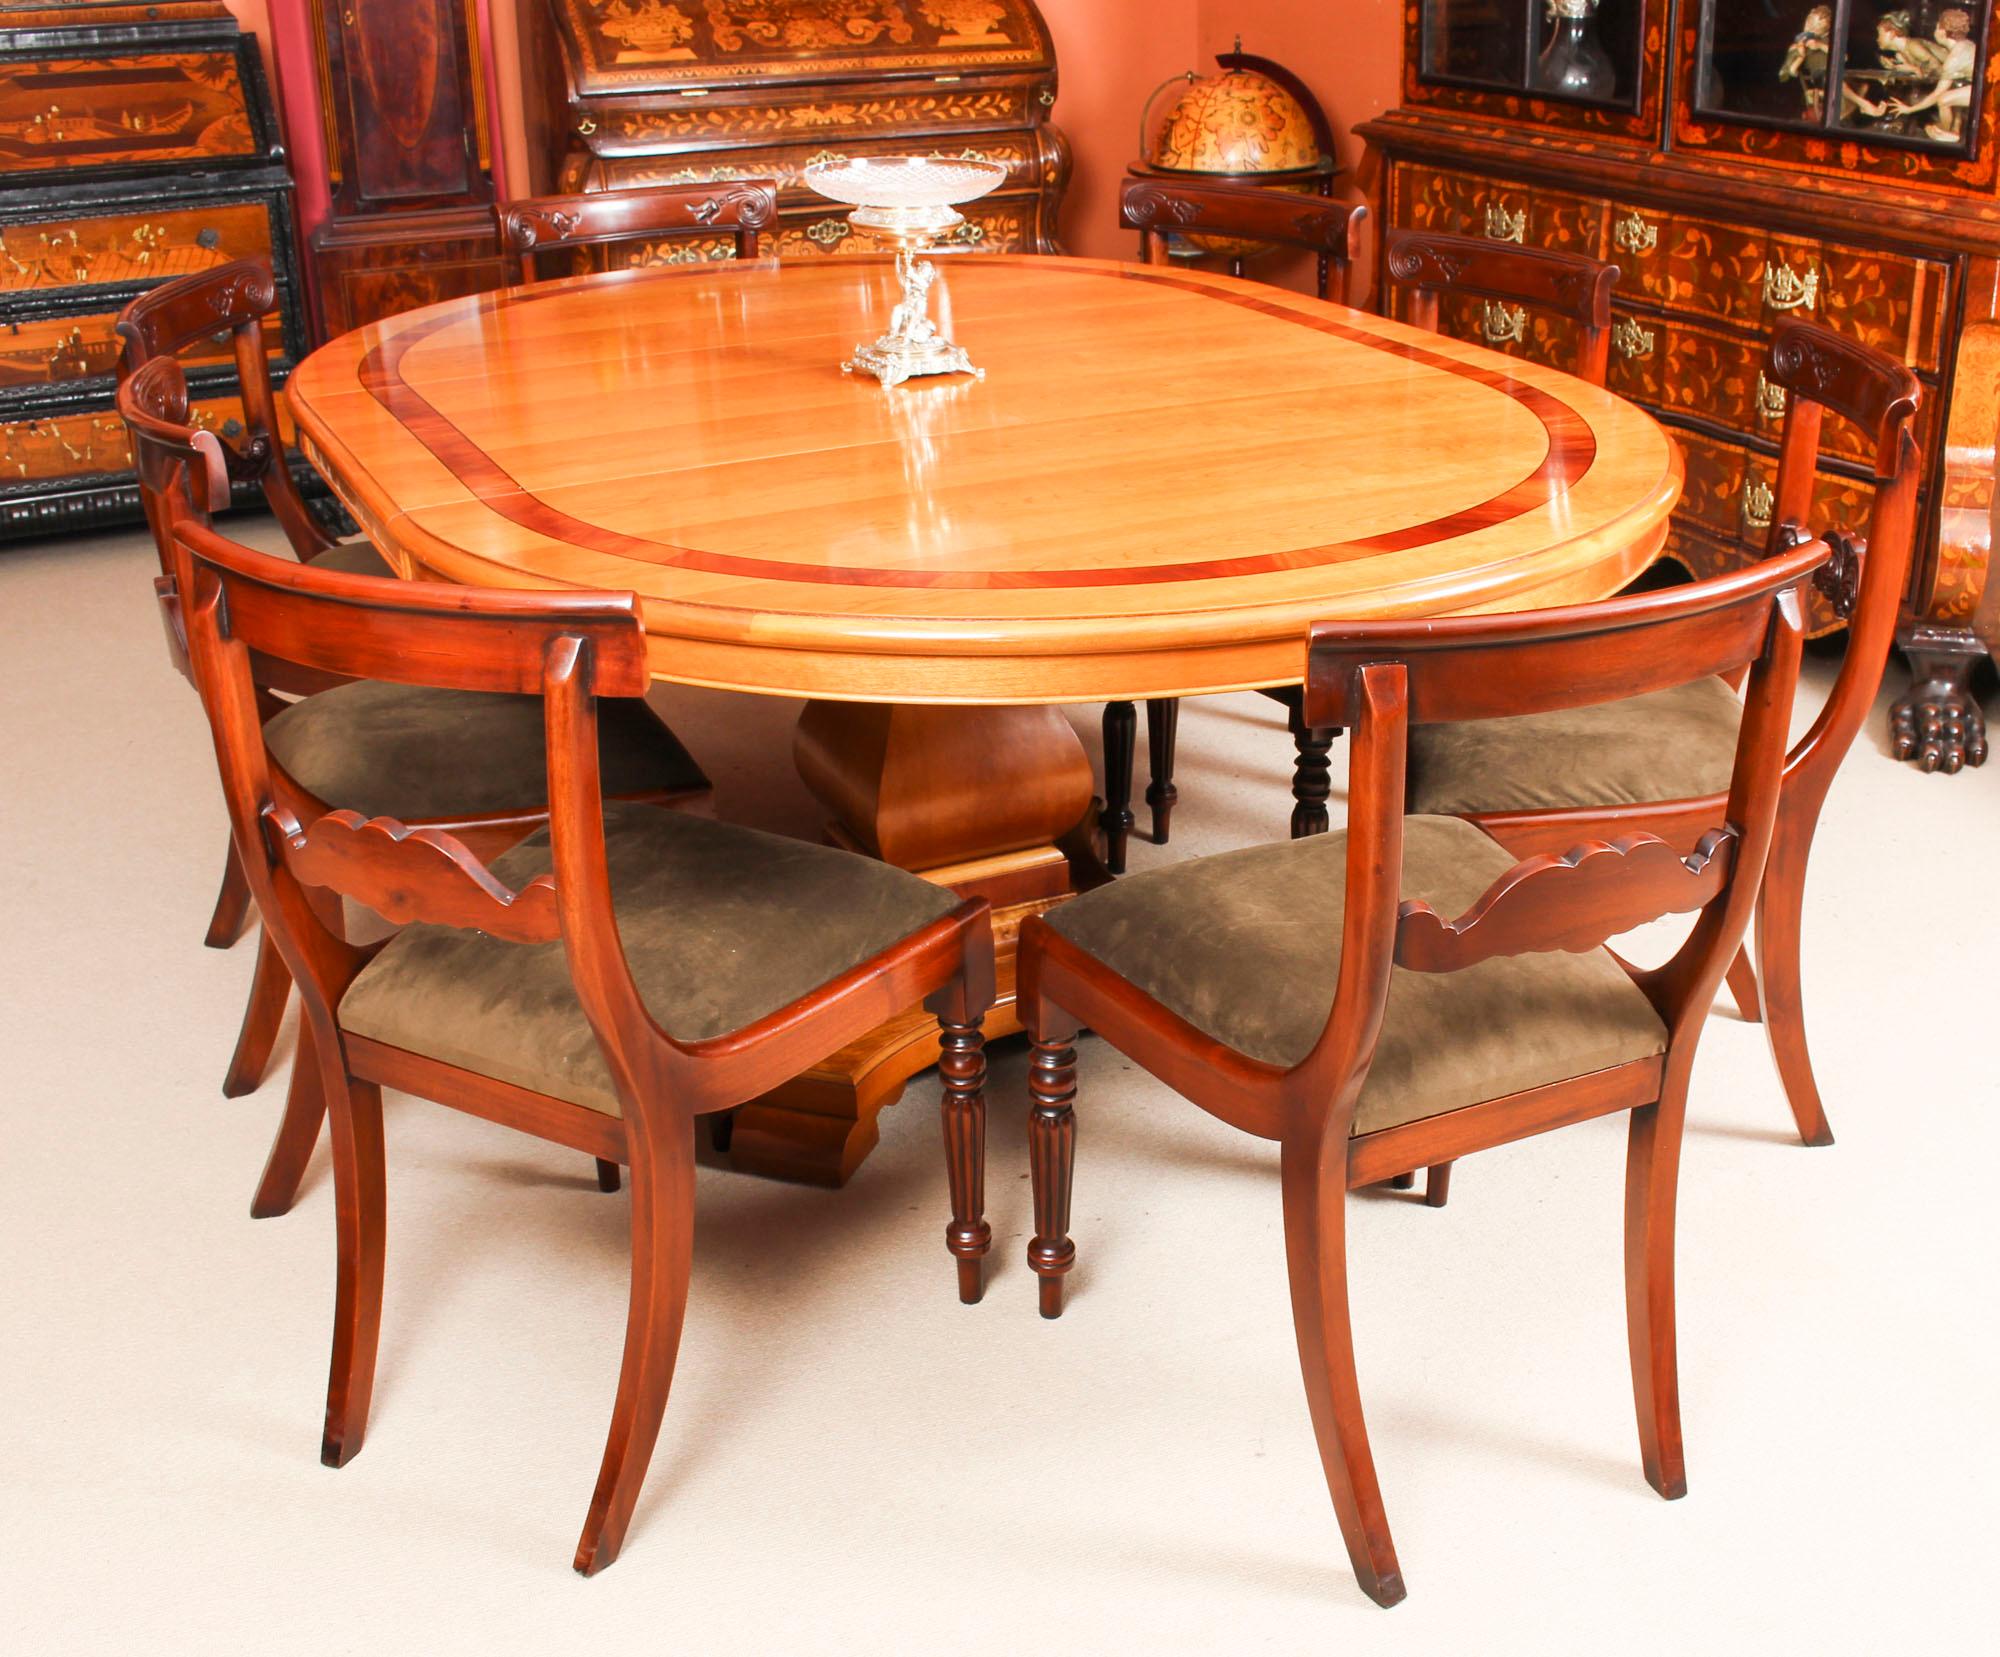 This is a magnificent vintage dining set comprising a cherry wood dining table by the renowned Norwich cabinet maker Charles Barr and a set of eight dining chairs, dating from the late 20th century.

This beautiful table is circular in shape when